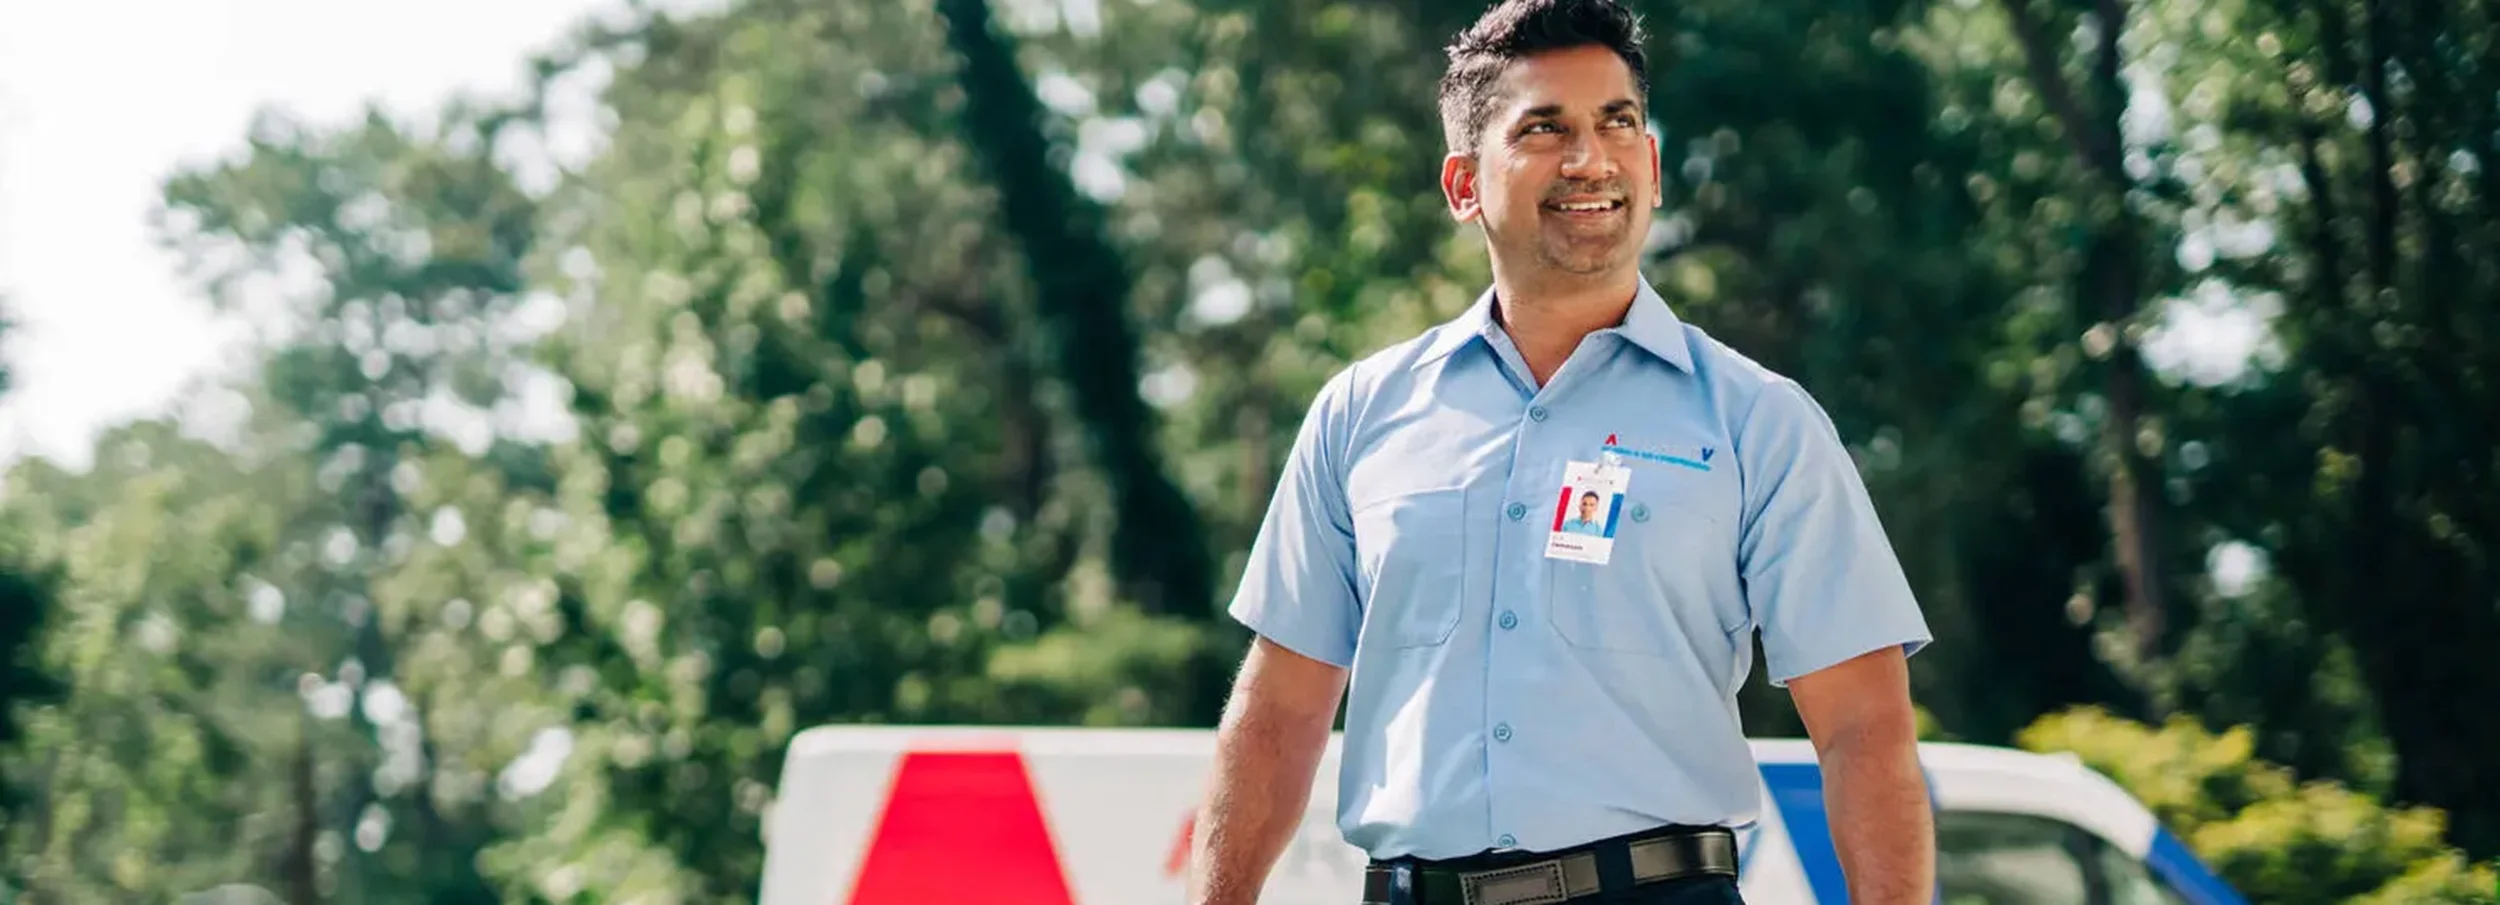 Smiling South Asian male Aire Serv technician in branded blue collared shirt arriving for residential service call.